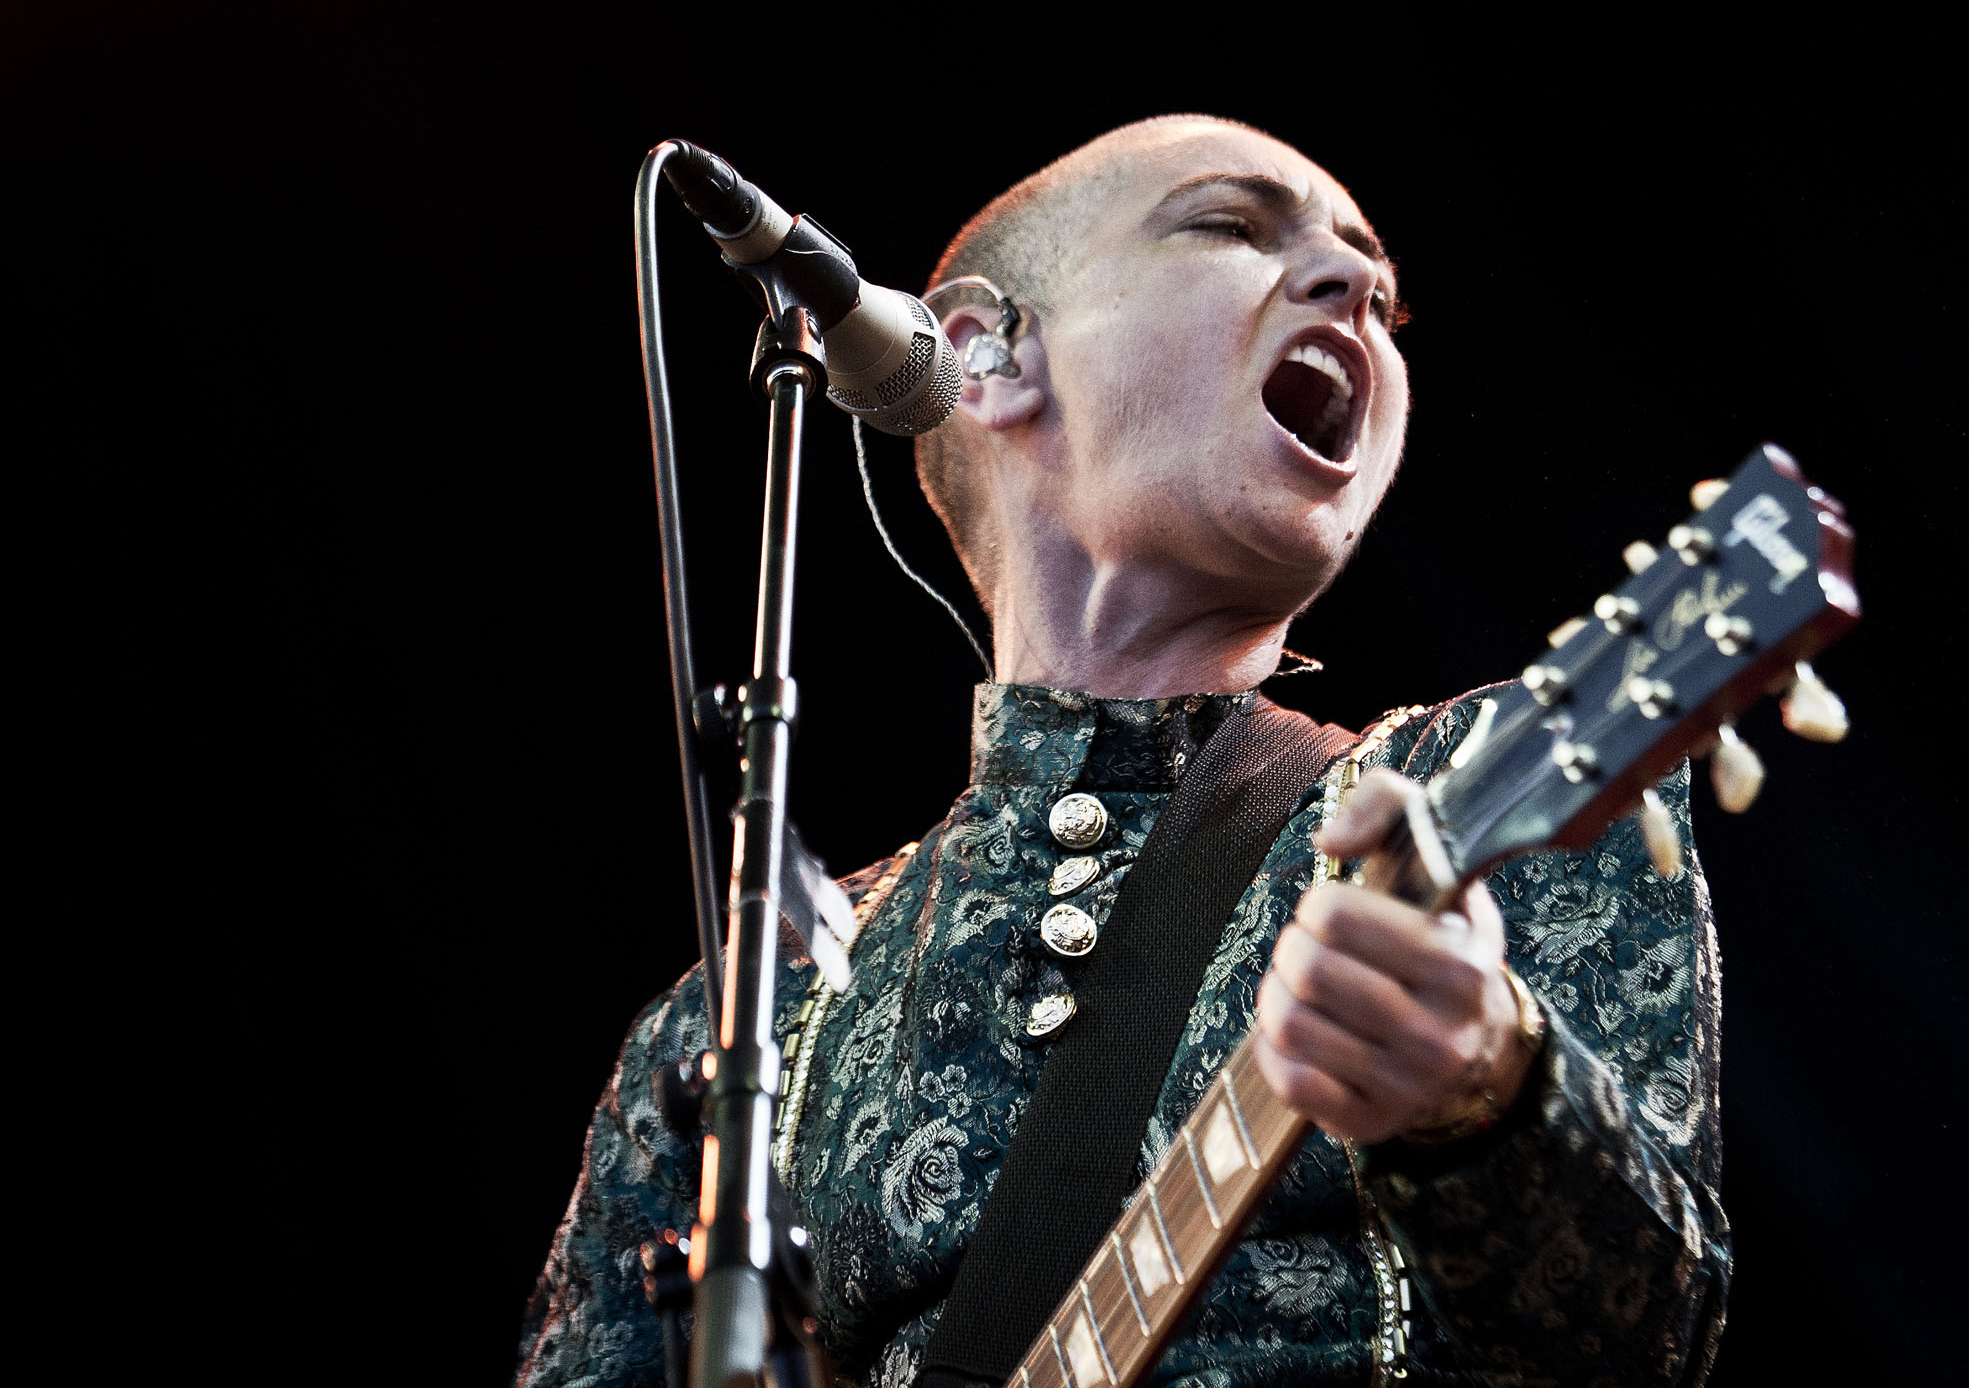 Sinead O'Connor, Evocative and Outspoken Singer, Is Dead at 56